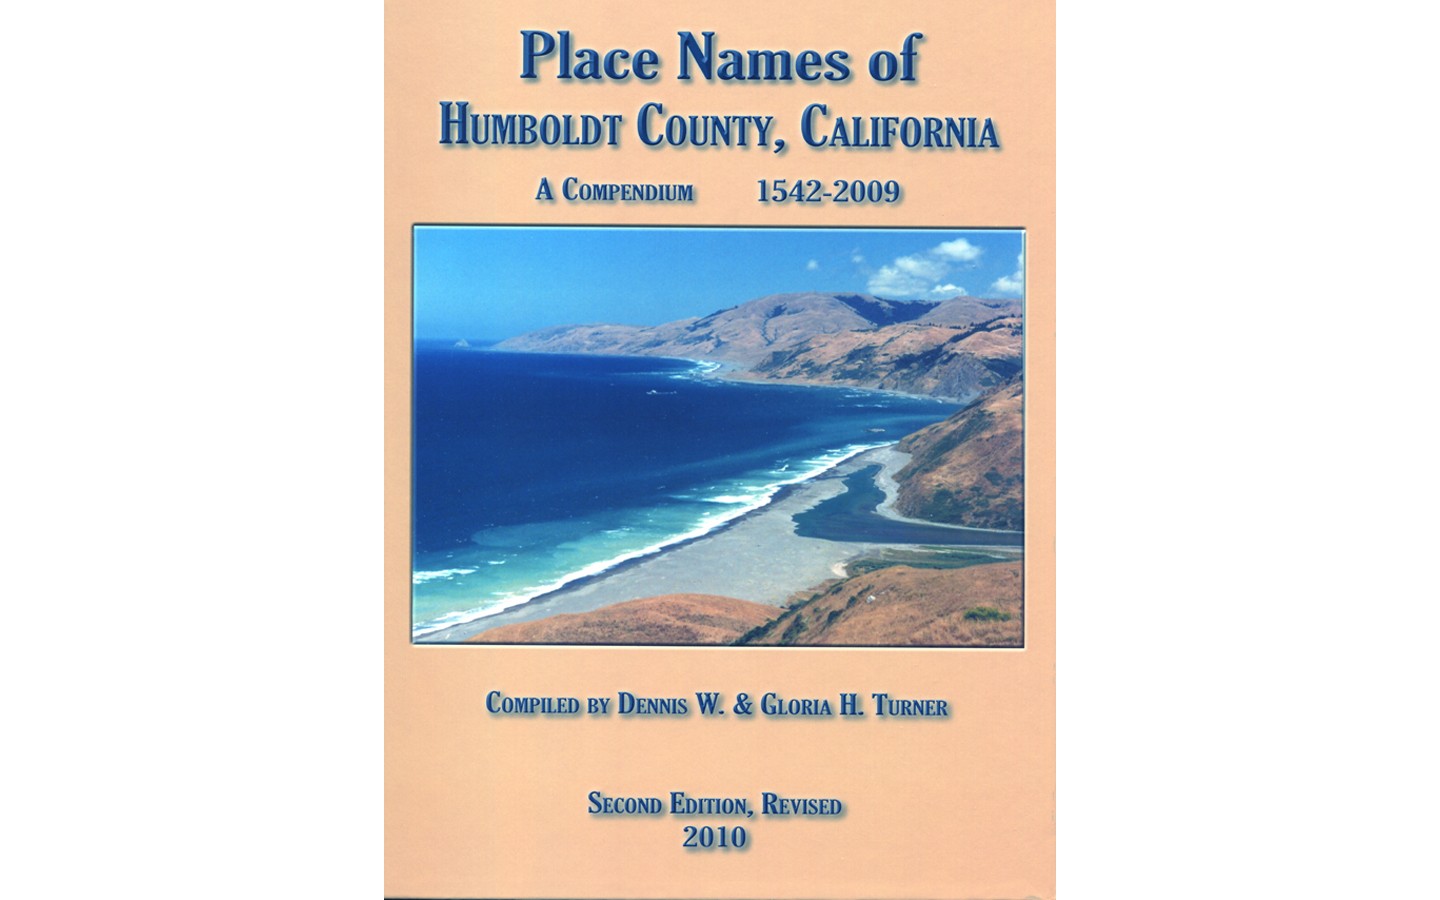 Place Names of Humboldt County, California: A Compendium 1542 - 2009 - BY DENNIS W. TURNER AND GLORIA H. TURNER